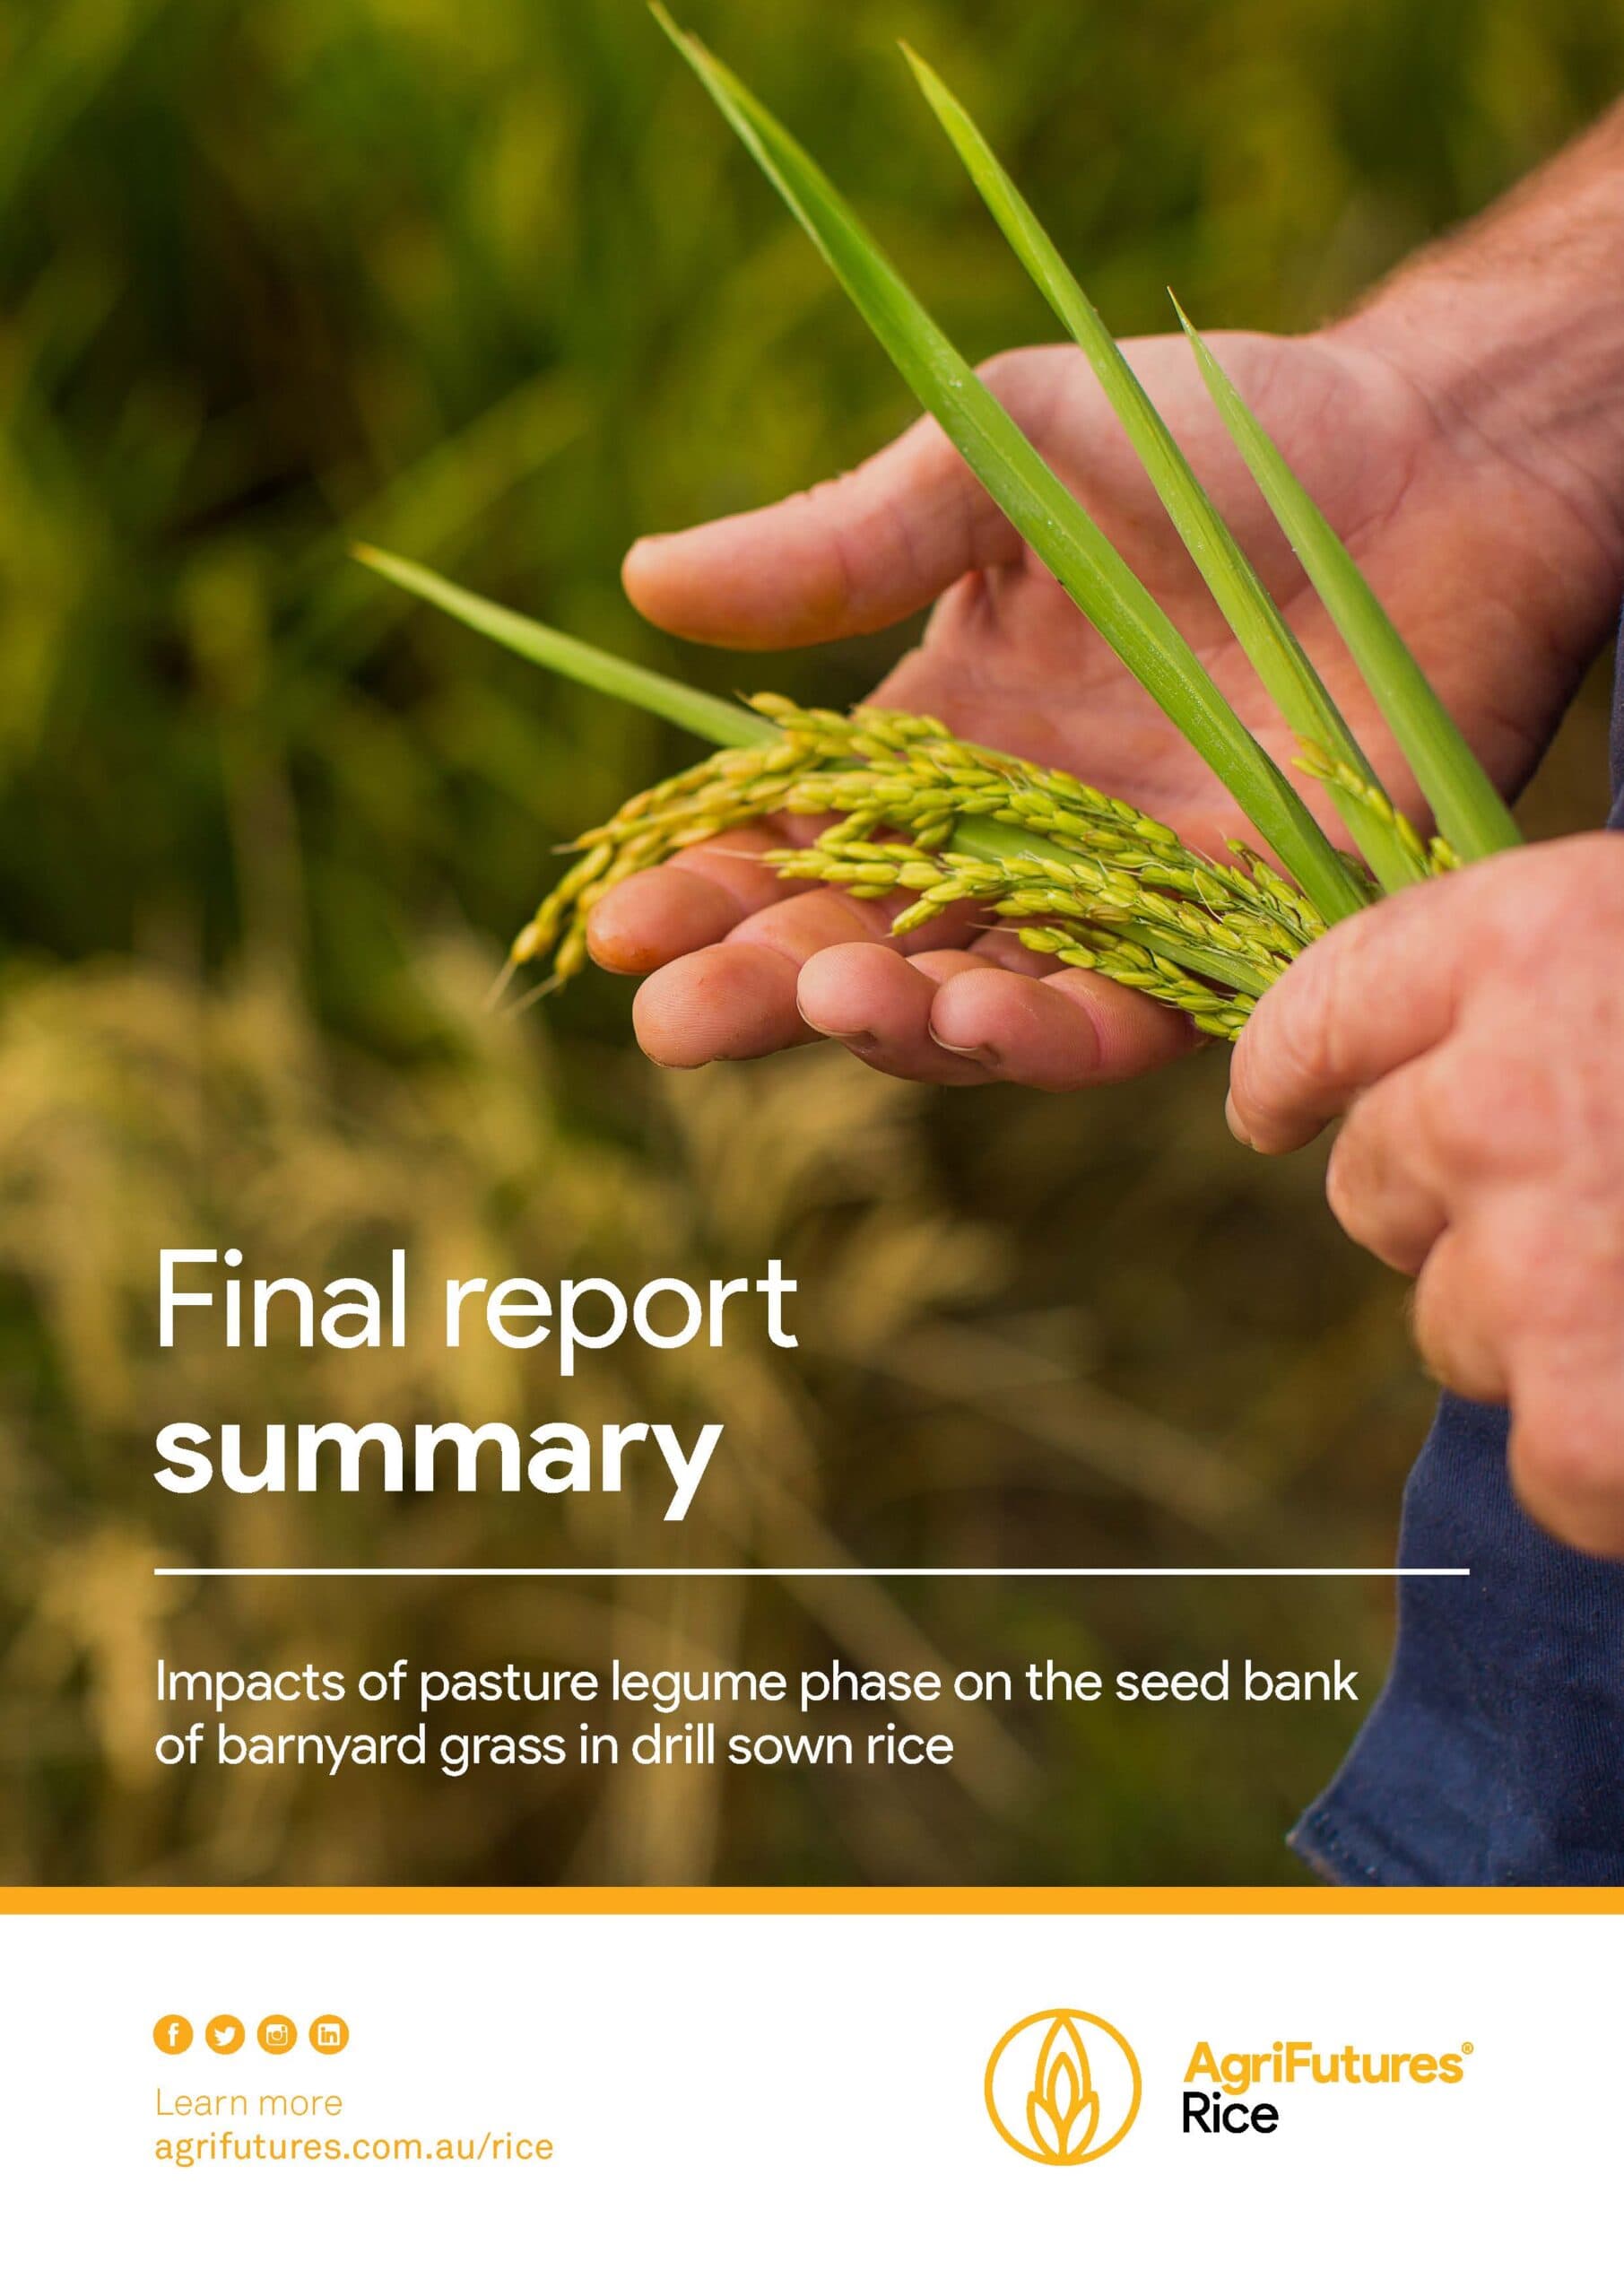 Final report summary: Impacts of pasture legume phase on the seed bank of barnyard grass in drill sown rice - image